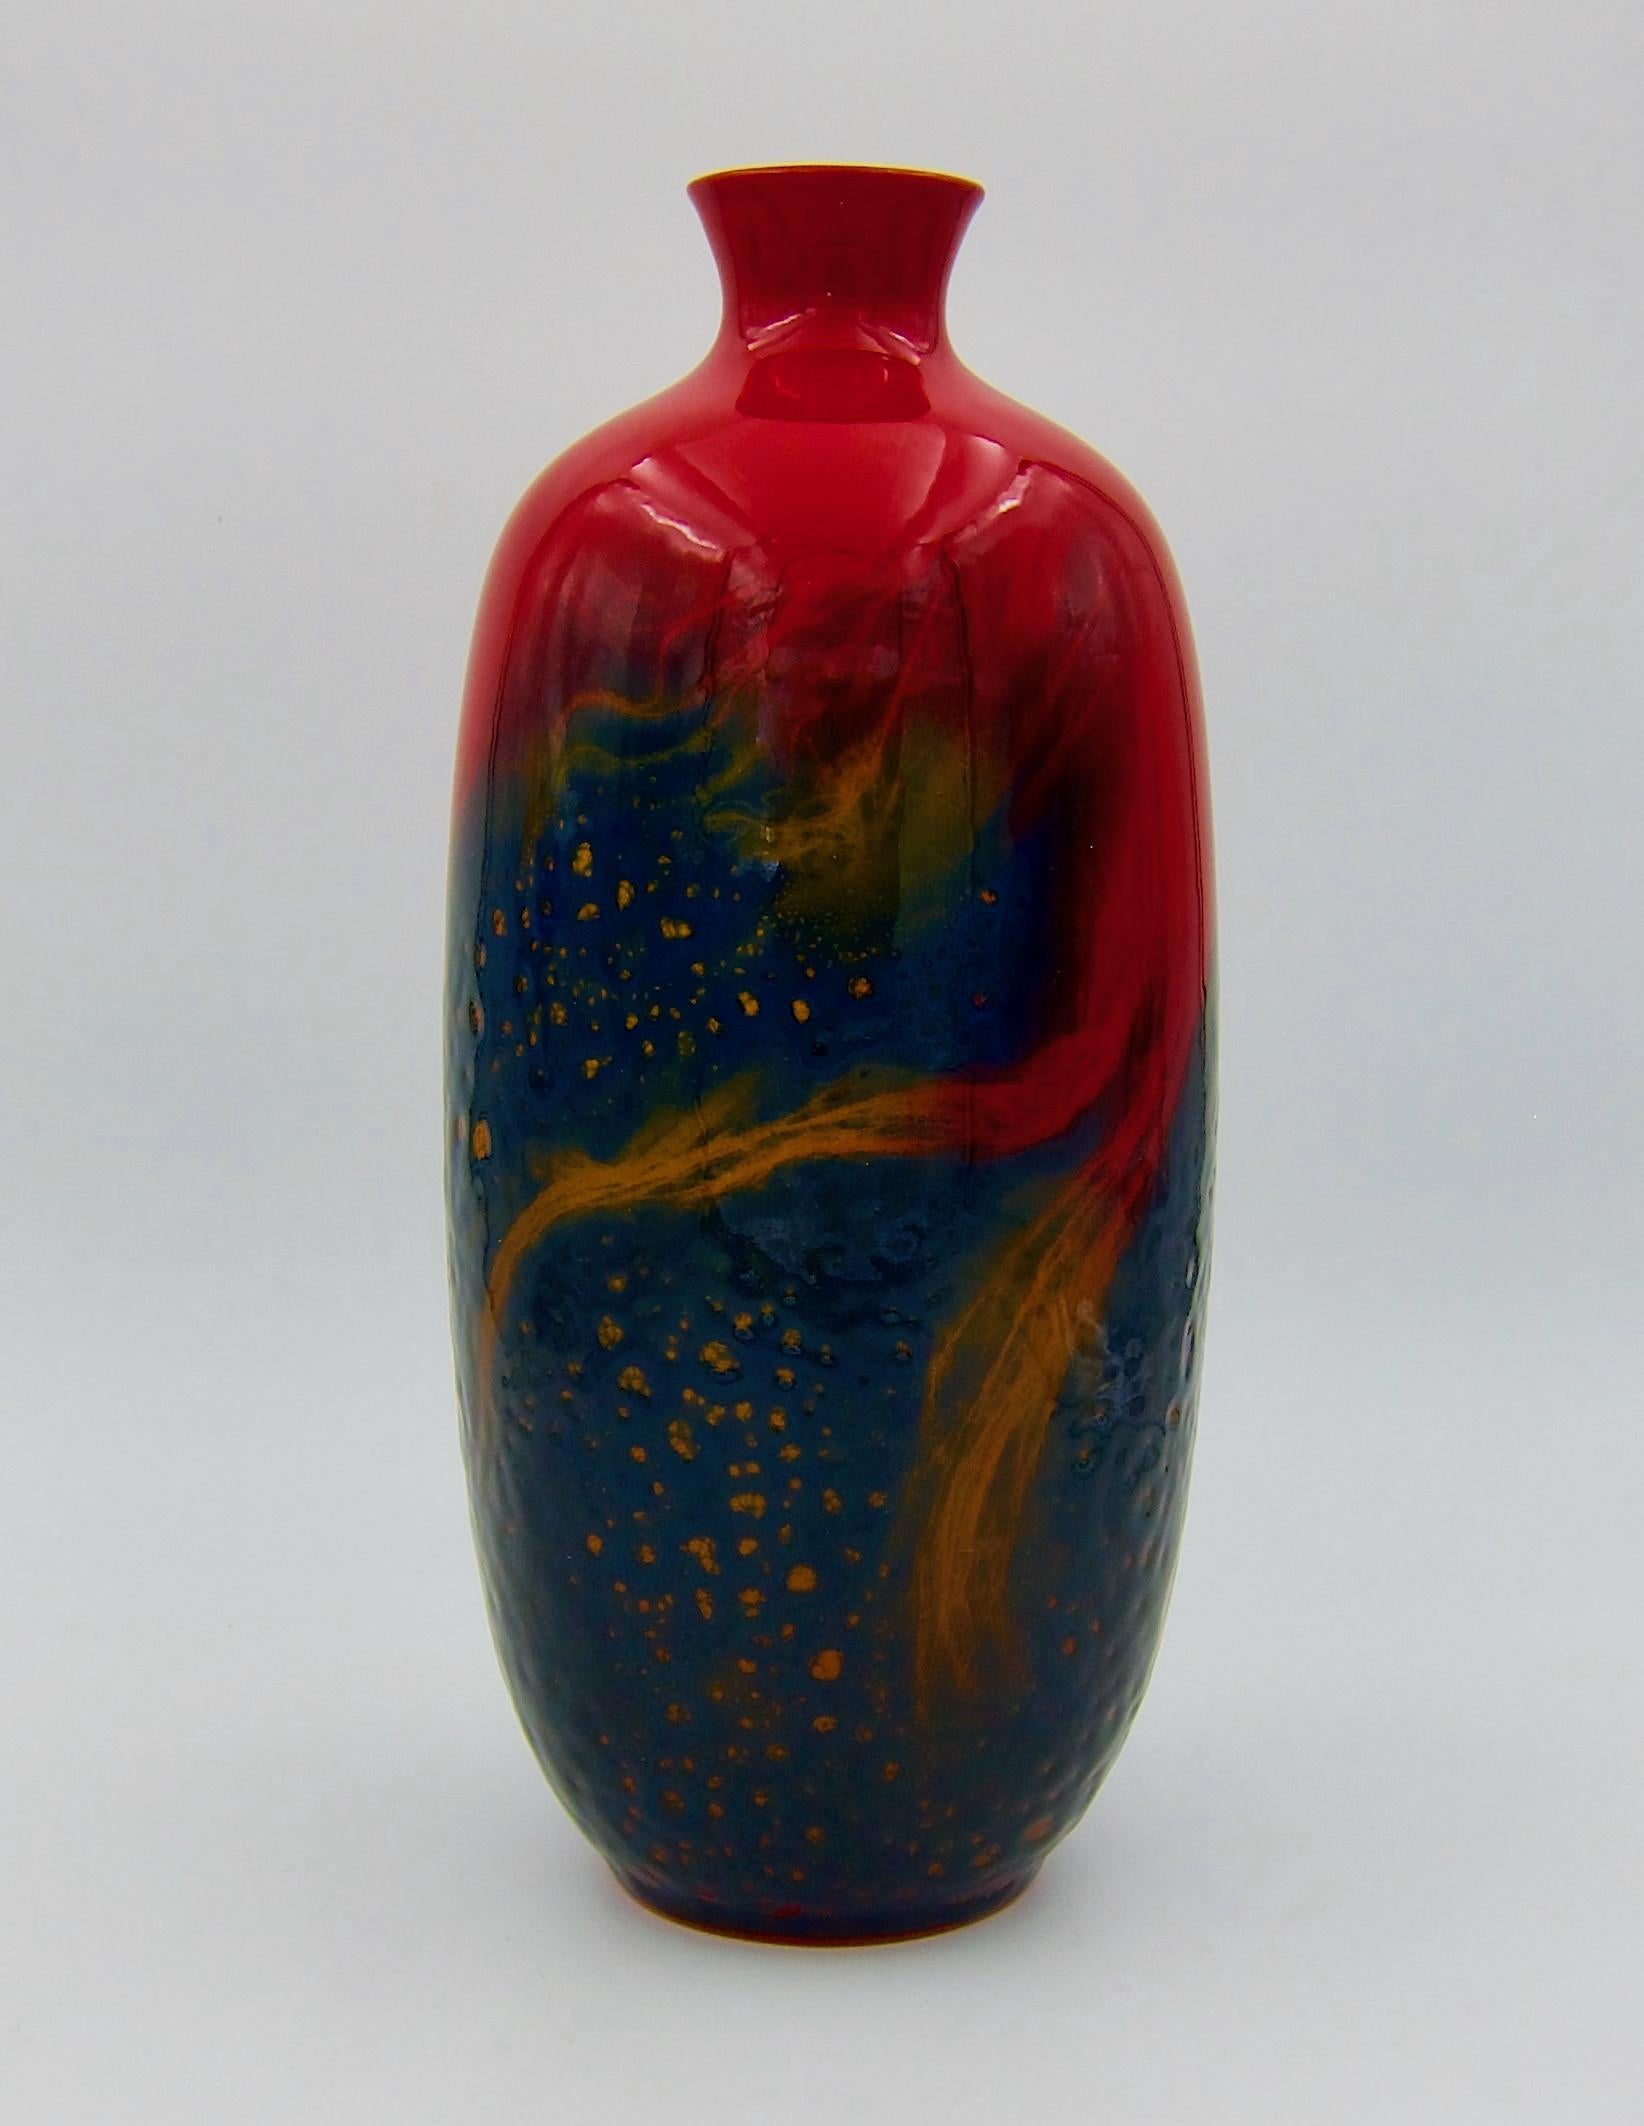 A large Royal Doulton Flambé vase from the Art Deco period, dating circa 1930. The rim and shoulders of the English art pottery vessel are decorated with a bold and glossy glaze of deep red over a textured blue body accented with fiery tendrils of